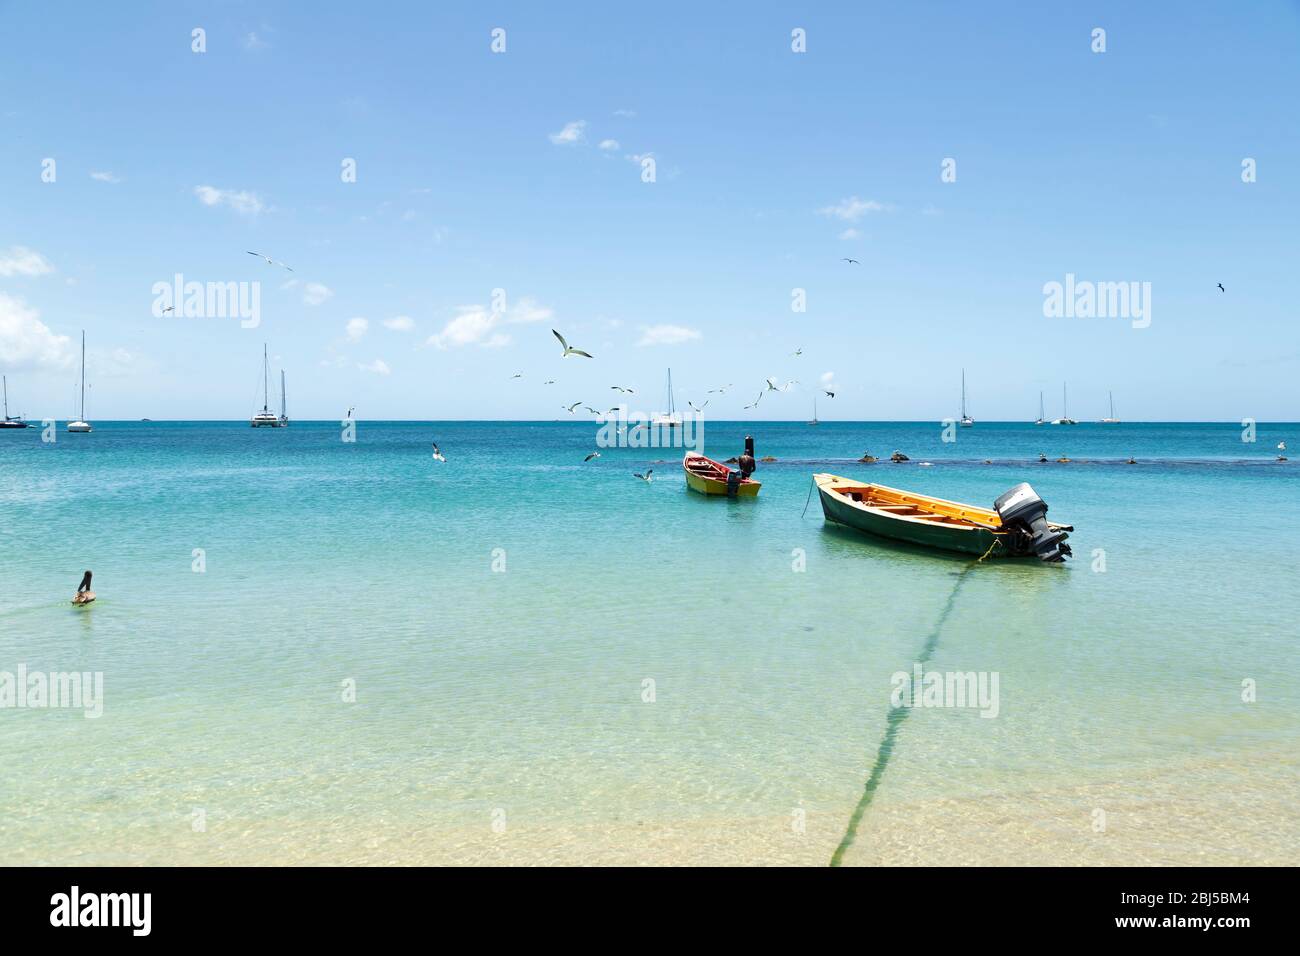 Typical day at the sea in a fishing village. In the distance a fisherman mends his nets, sea gulls hover overhead and a pelican to the left Stock Photo